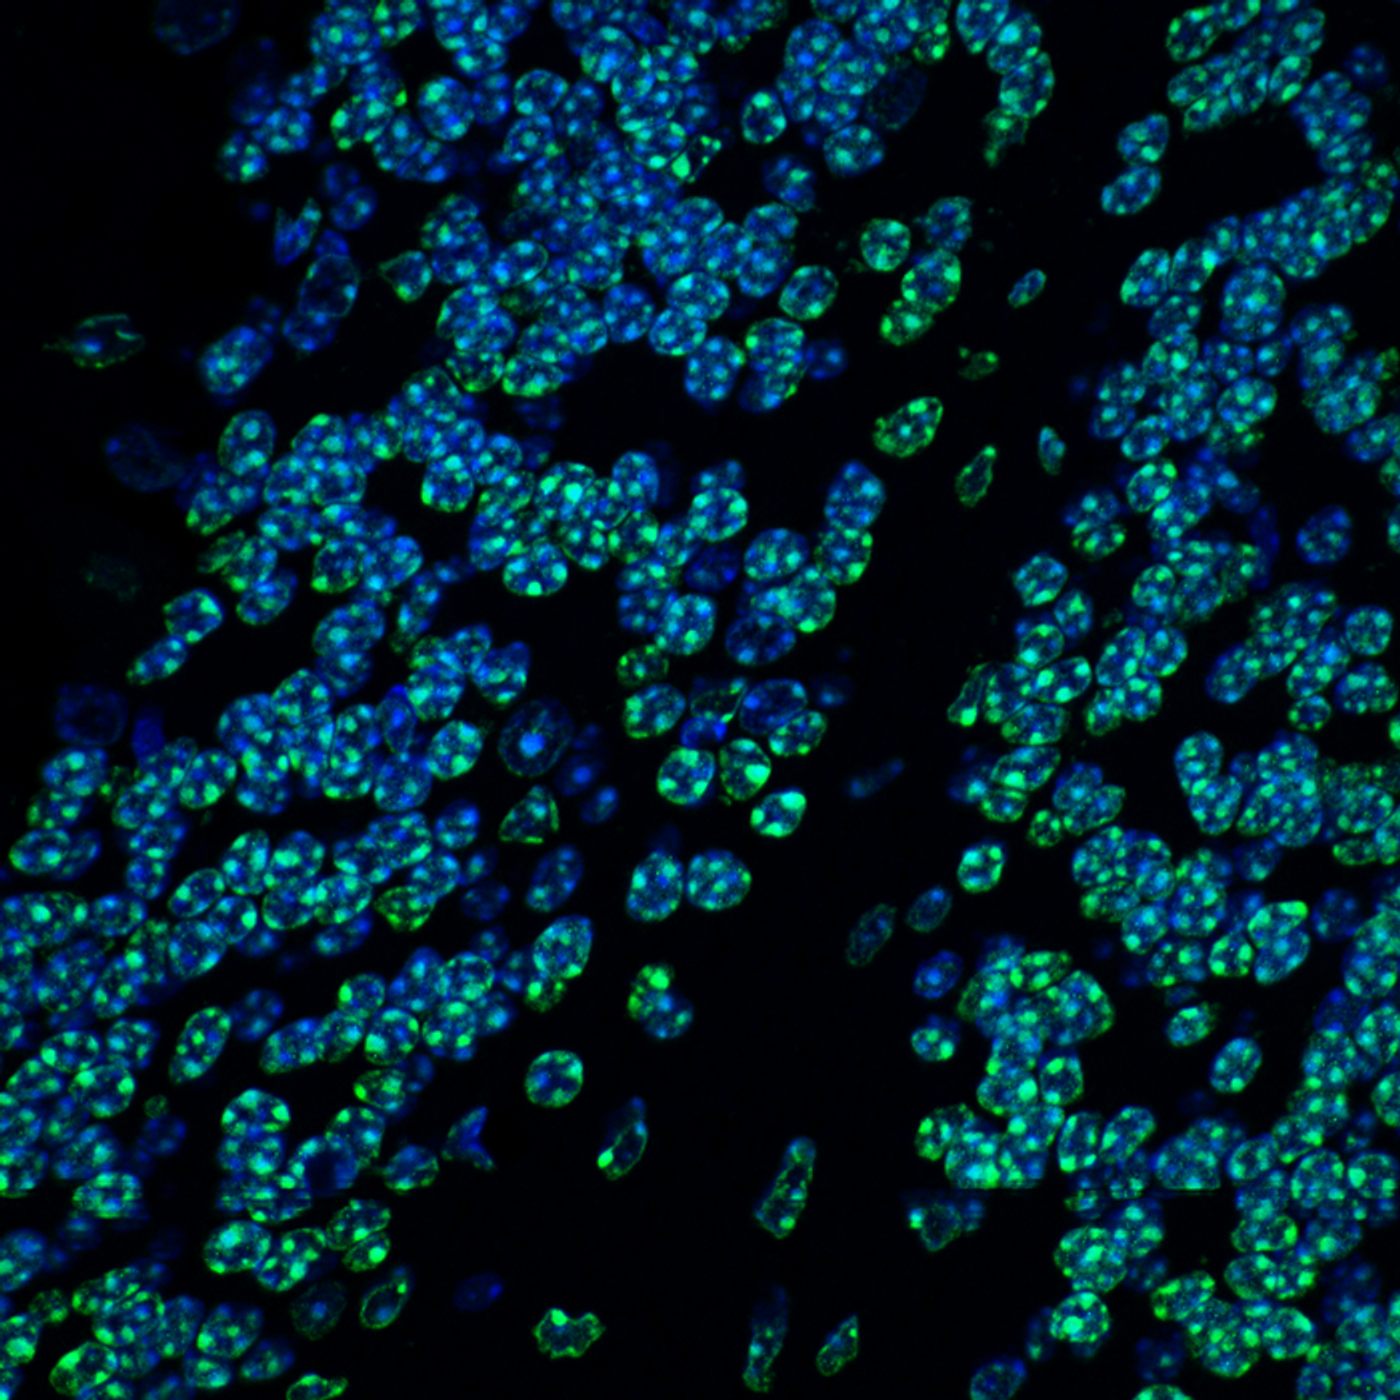 Mouse cerebellum (magnified), DNA (blue), Tri-methylation of lysine 9 on histone H3 (H3K9me3), (green) shows silenced heterochromatin. / Credit: ©Hagelkruys/IMBA